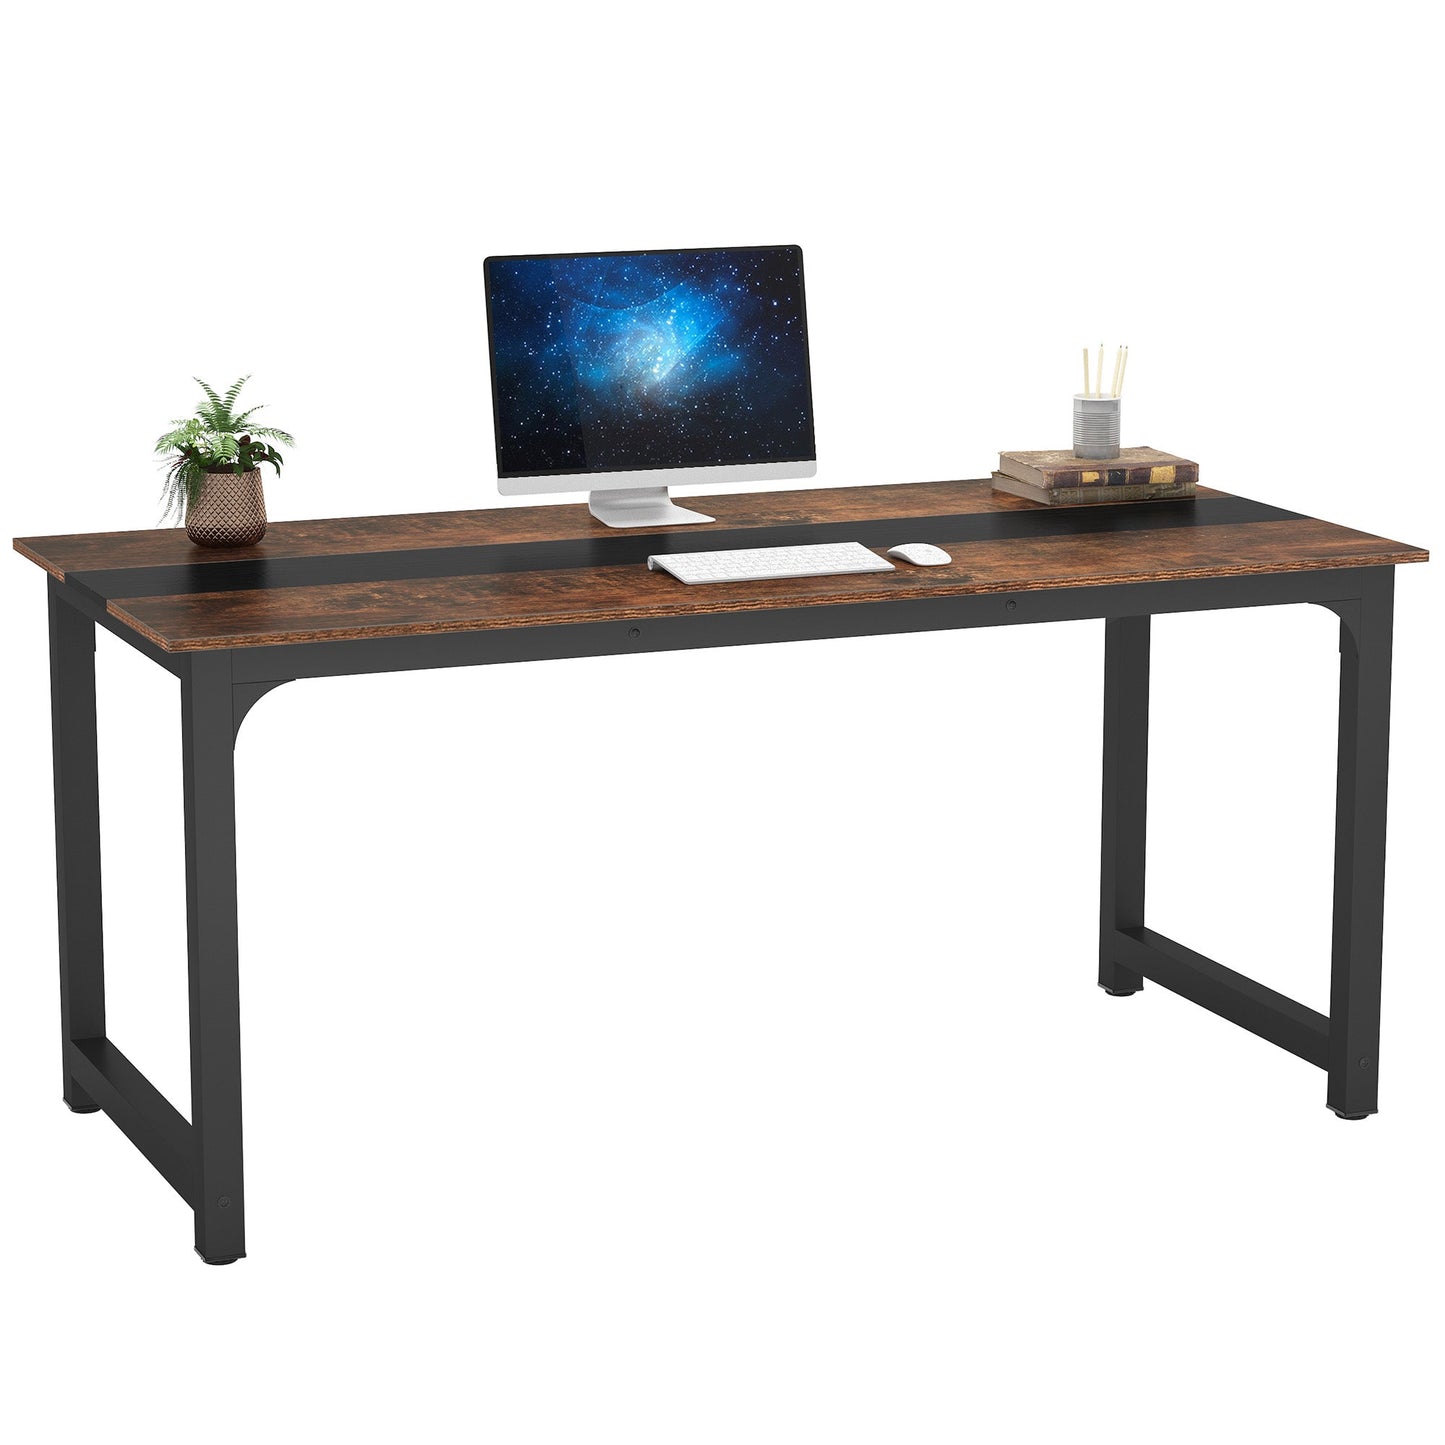 Conference Table, Rectangular Meeting Seminar Table Boardroom Desk, Tribesigns, 2